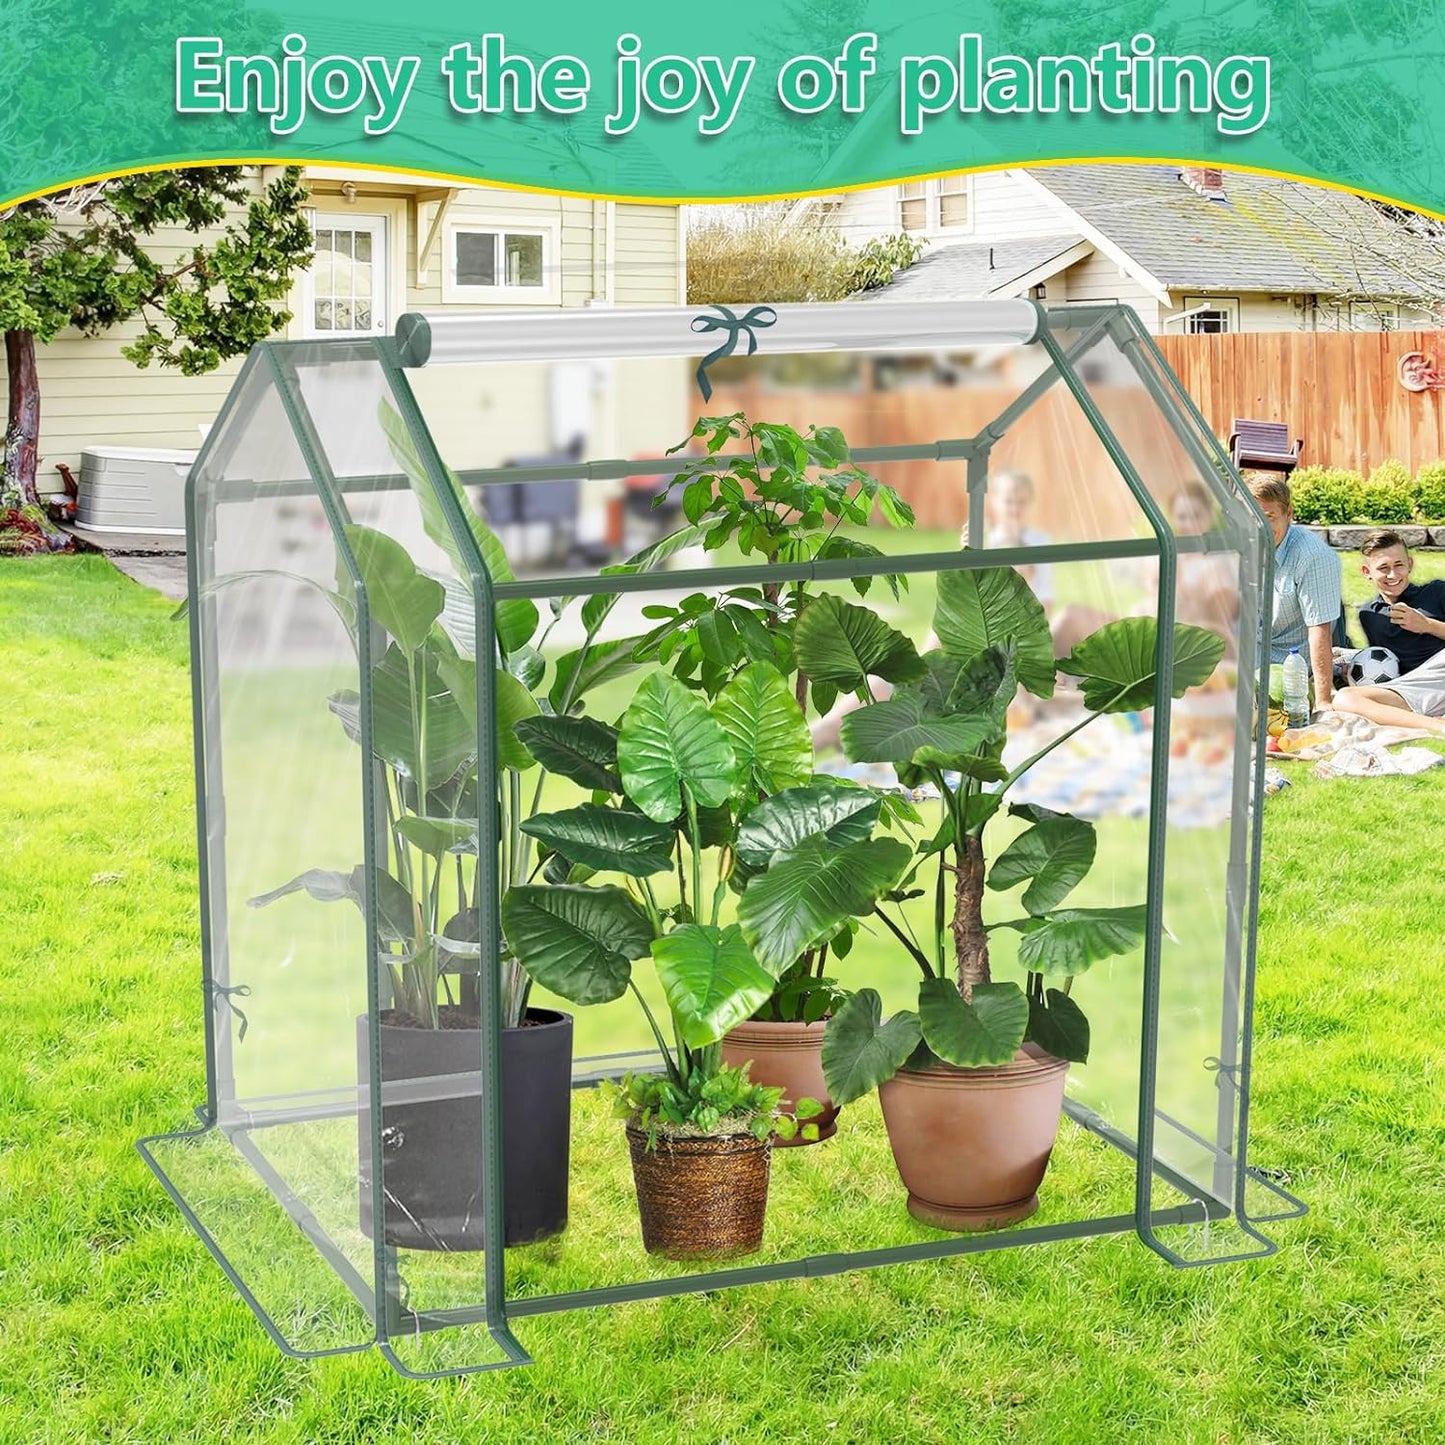 Mini Greenhouse,33.5”X 23.2”X 32.5” Greenhouse Tent for Indoor Outdoor,Durable Green House Kit with PVC Cover,Small Green House Garden Nursery Plant Cover Tent for Gardening Germination and Seedling